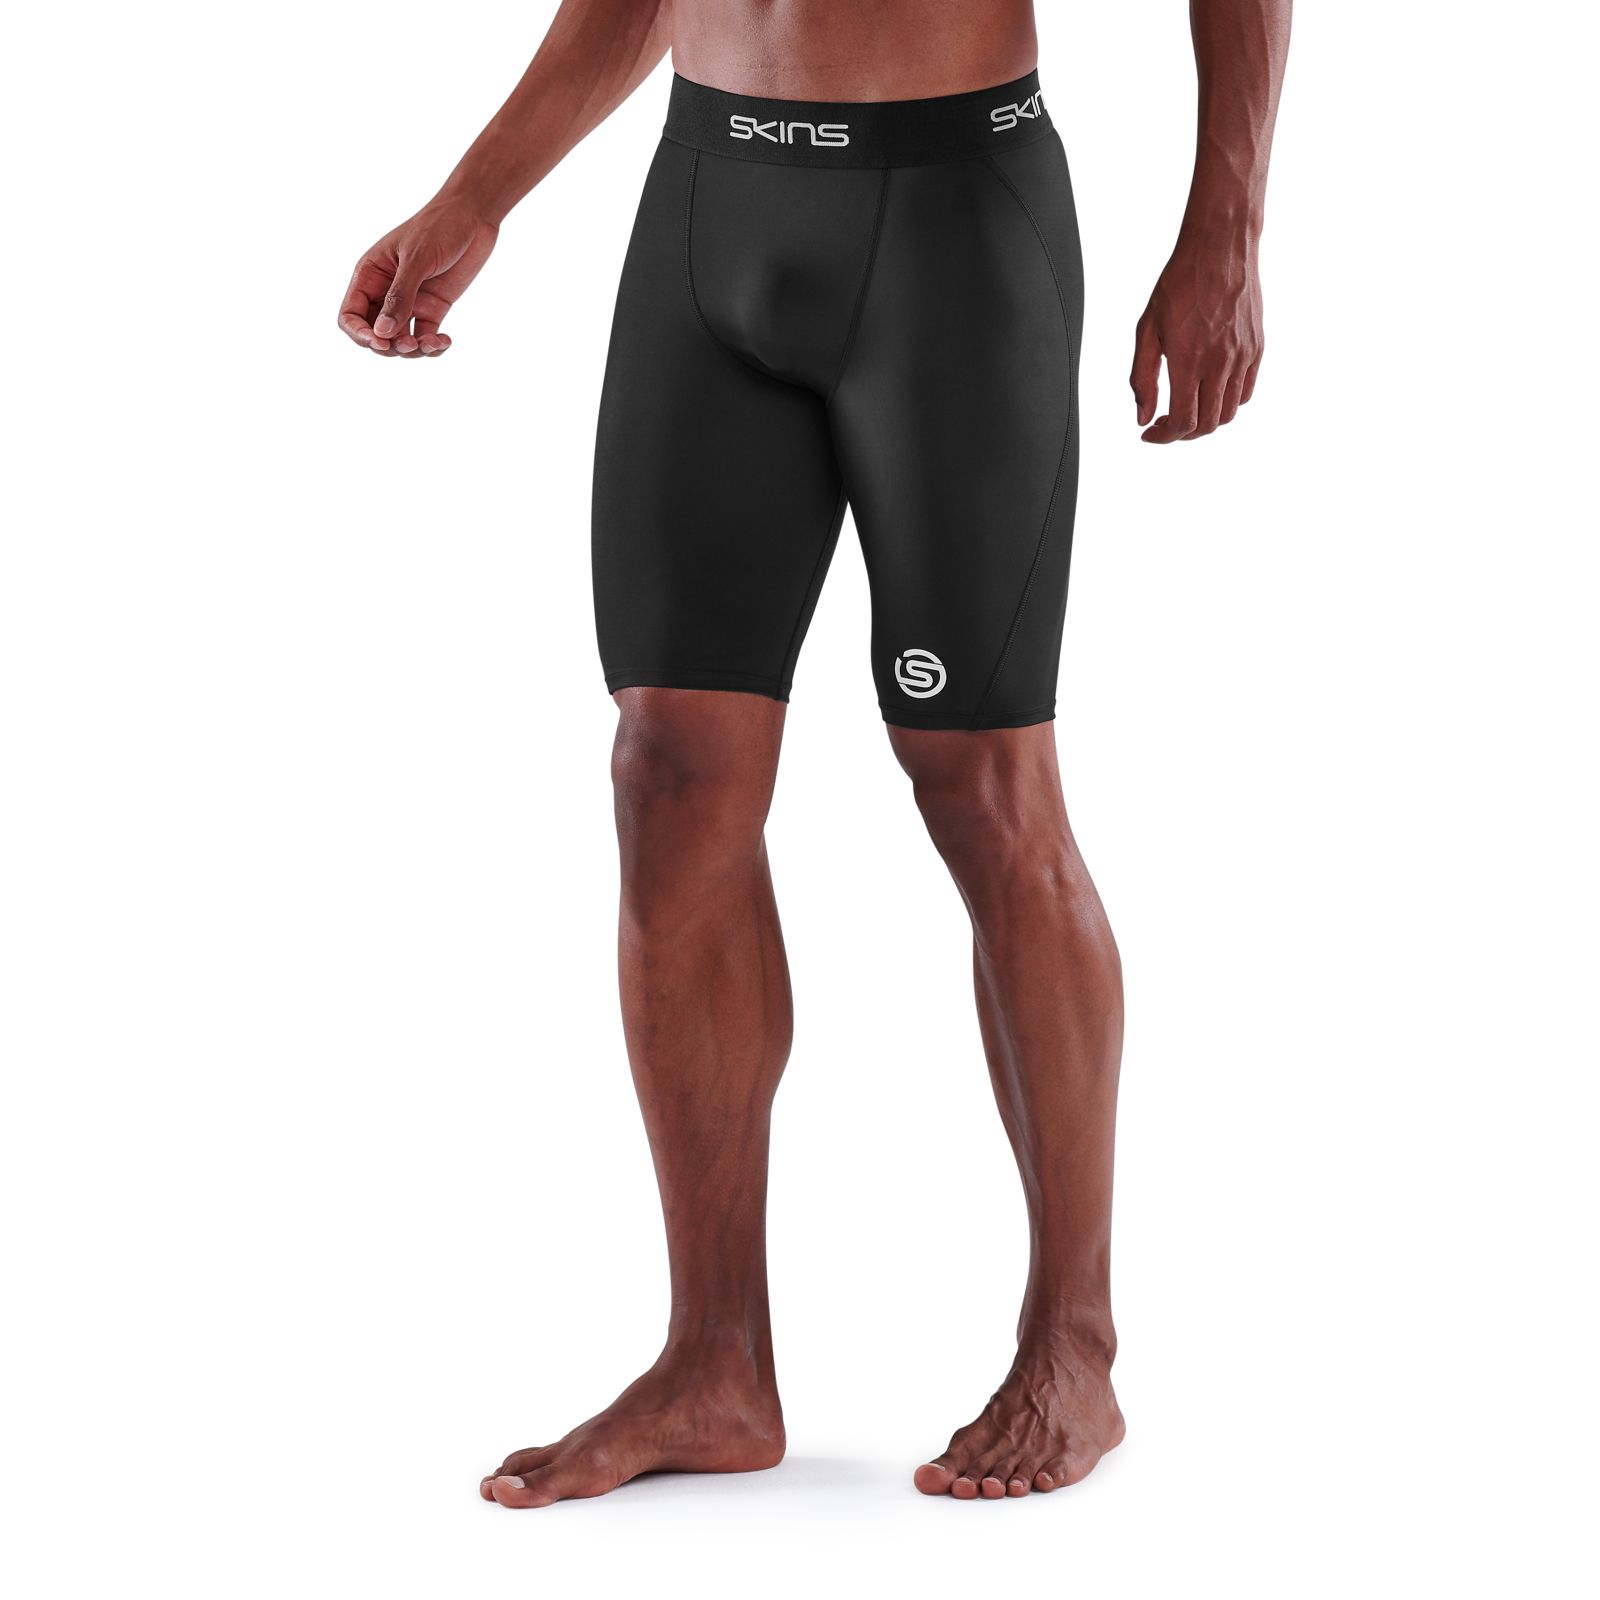 Up To 77% Off on Men's Compression Pants Quick